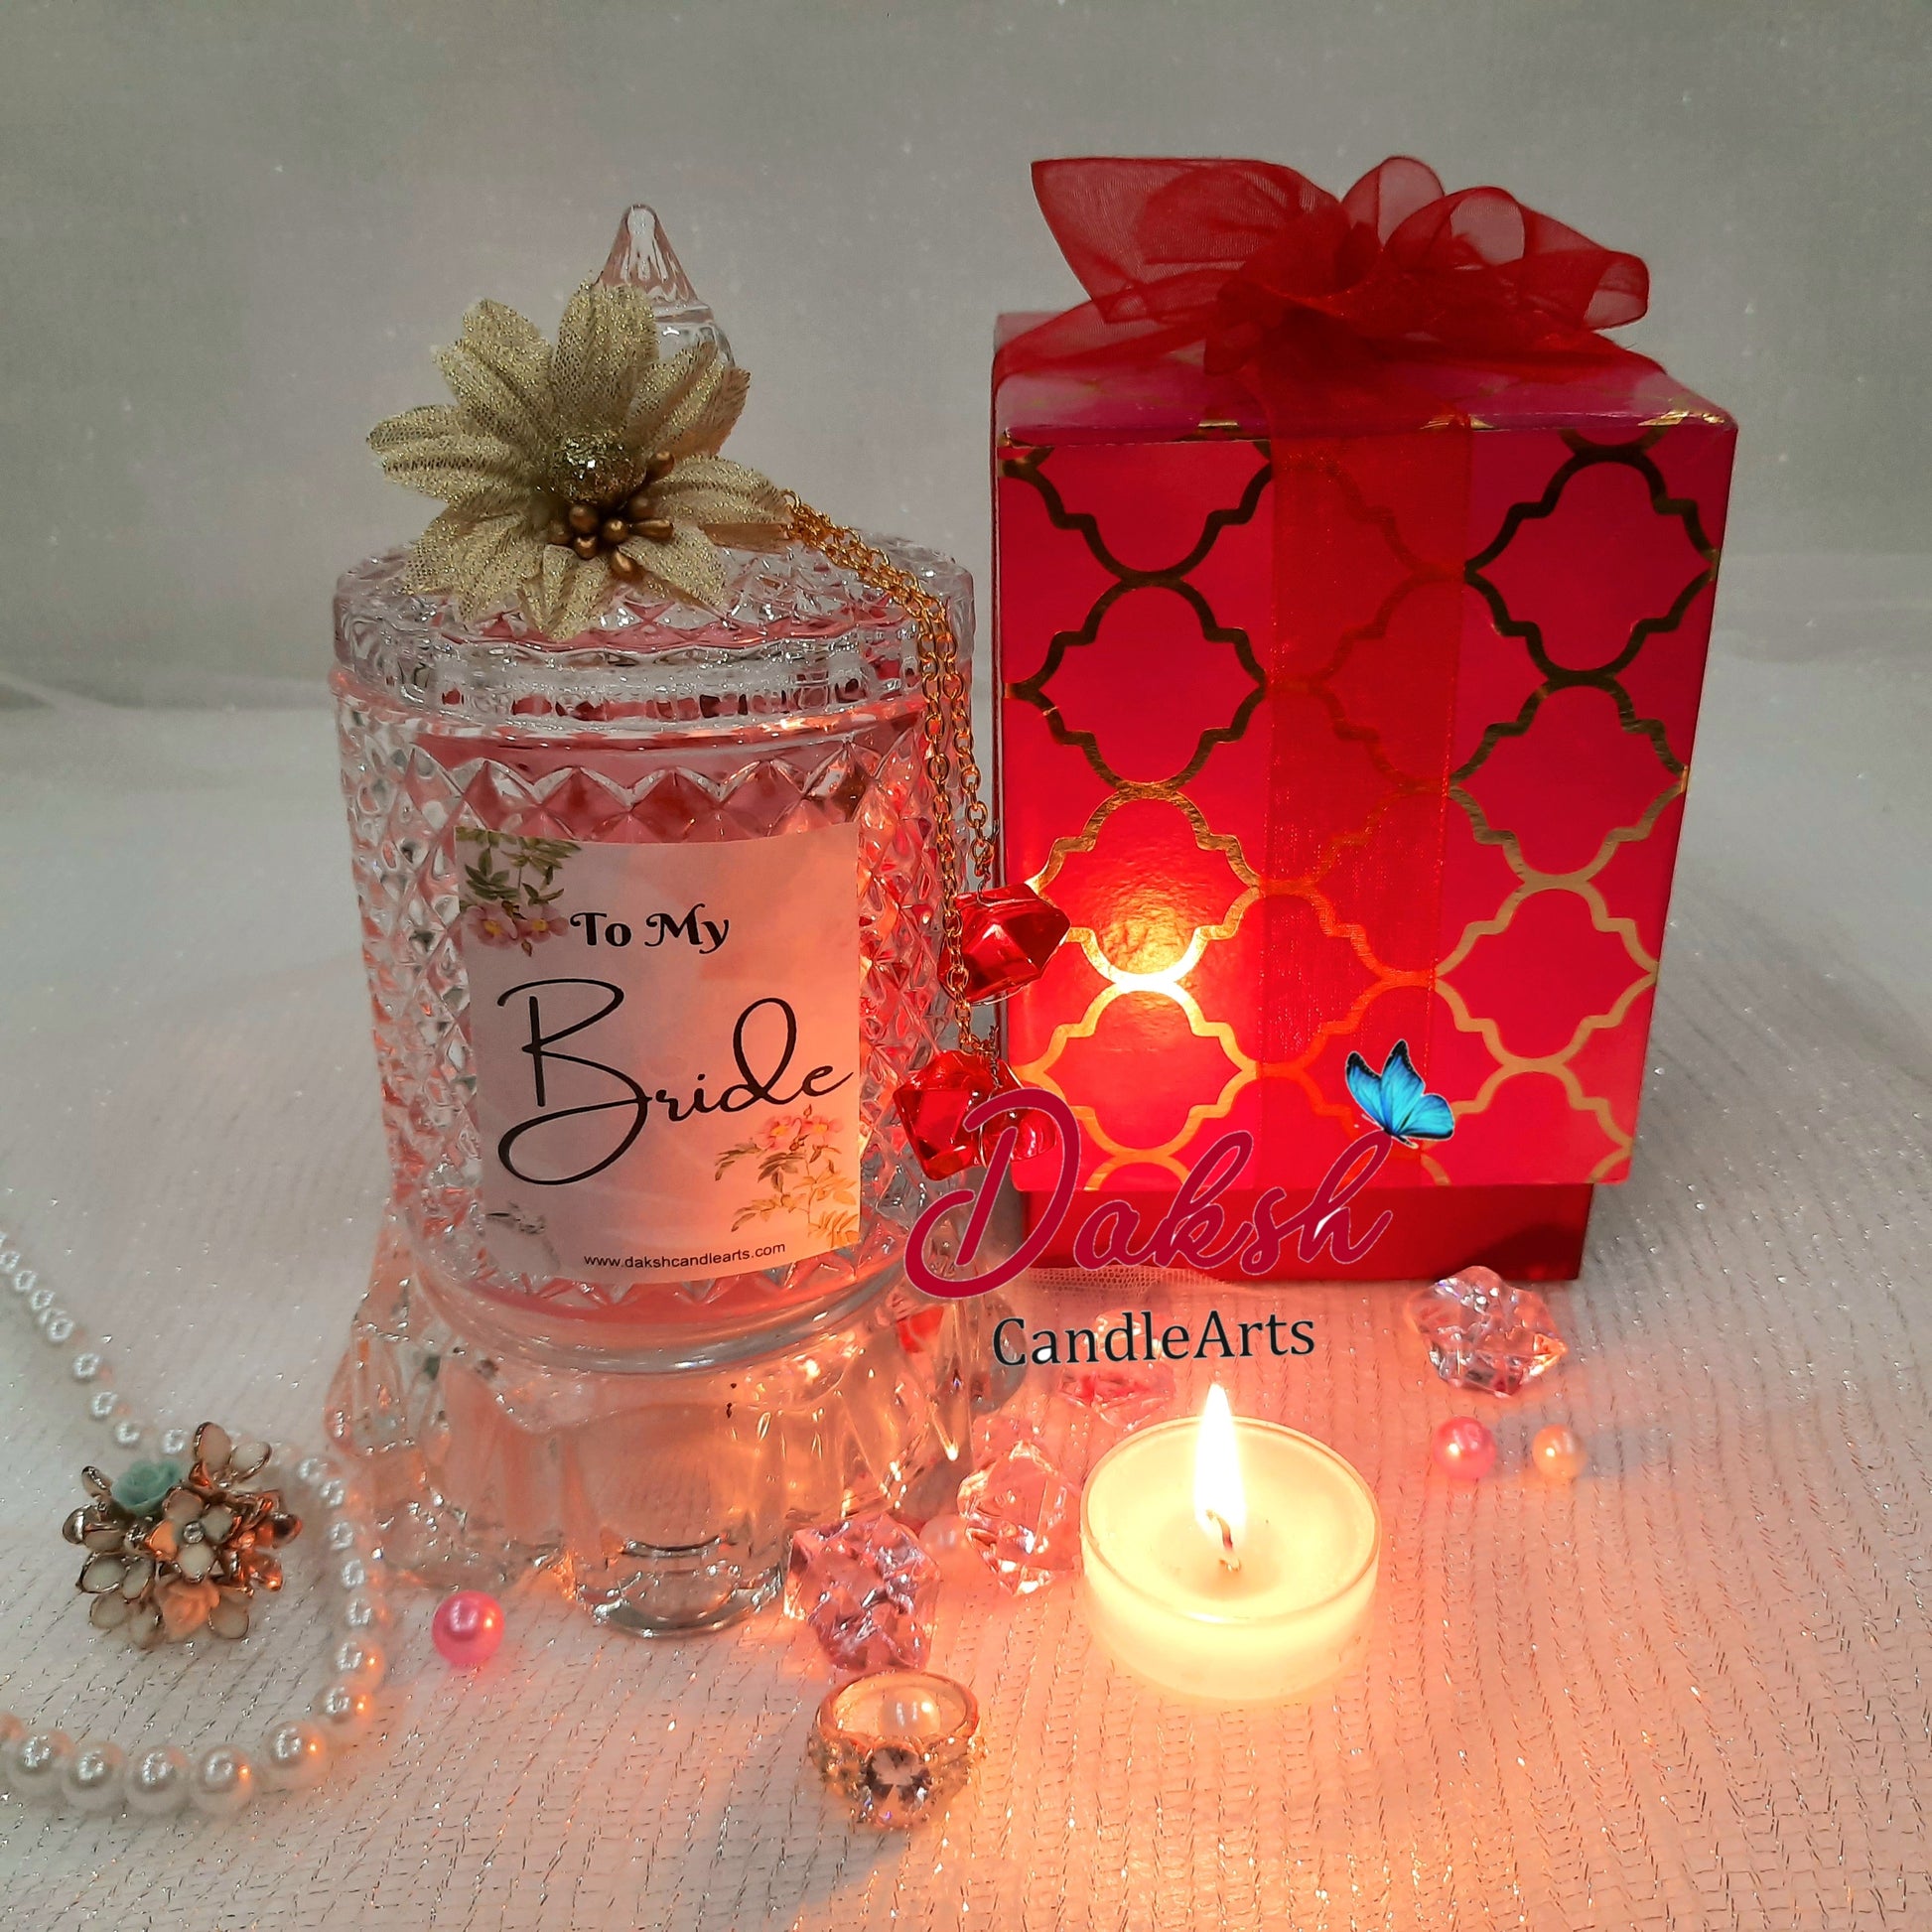 Heriyan Scented Glass Jar Candle Soy Wax Blended with Fragrance Oil for  Gifting, Home Decoration, Birthday, Bedroom (Rose, Crystal Jar Candle)